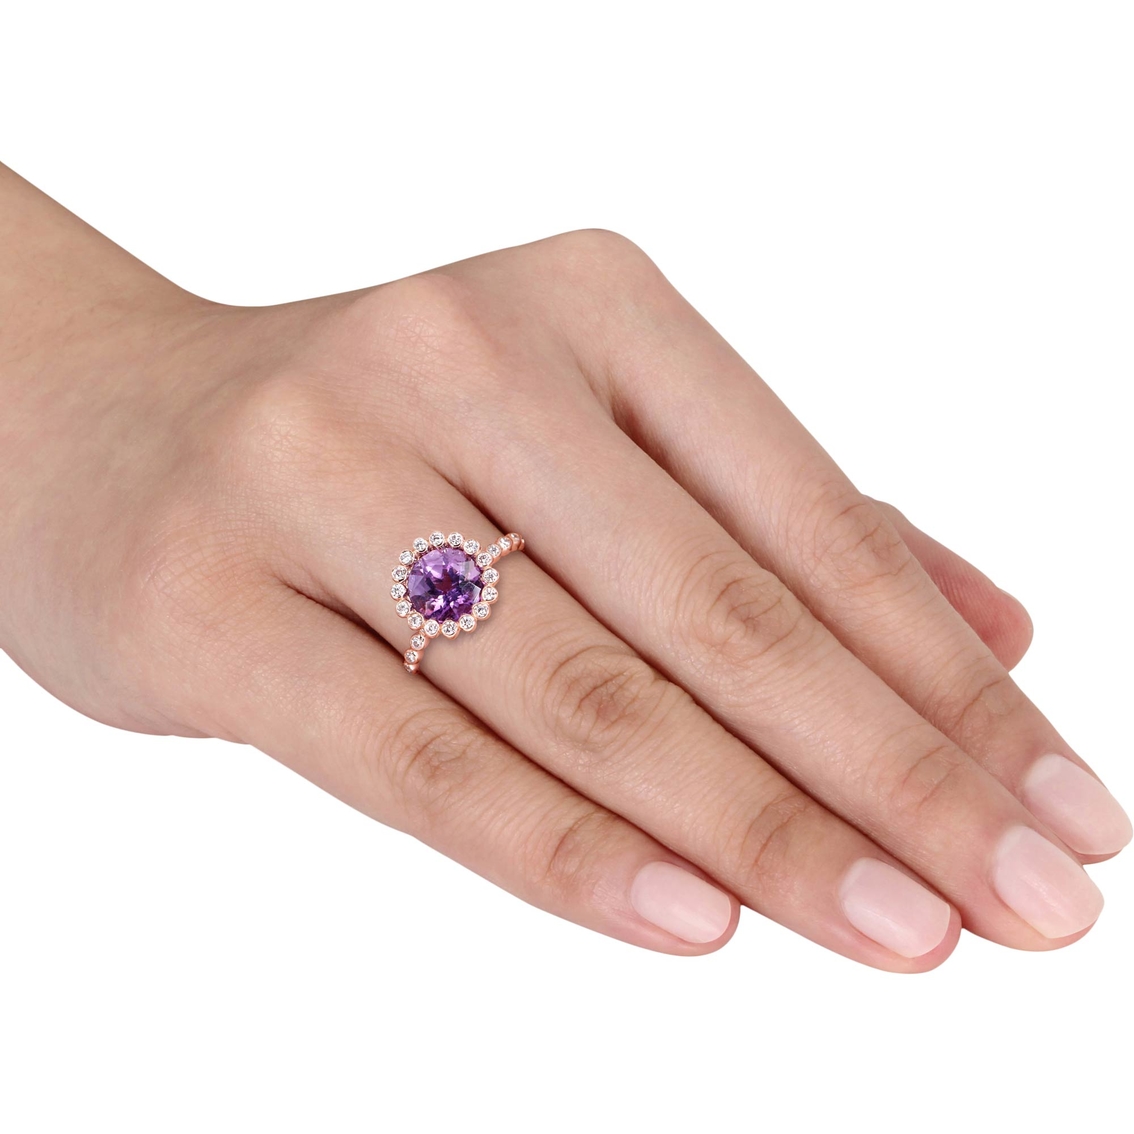 Sofia B. 14K Rose Gold Amethyst and 1/4 CTW Diamond Halo Scalloped Ring - Image 4 of 4